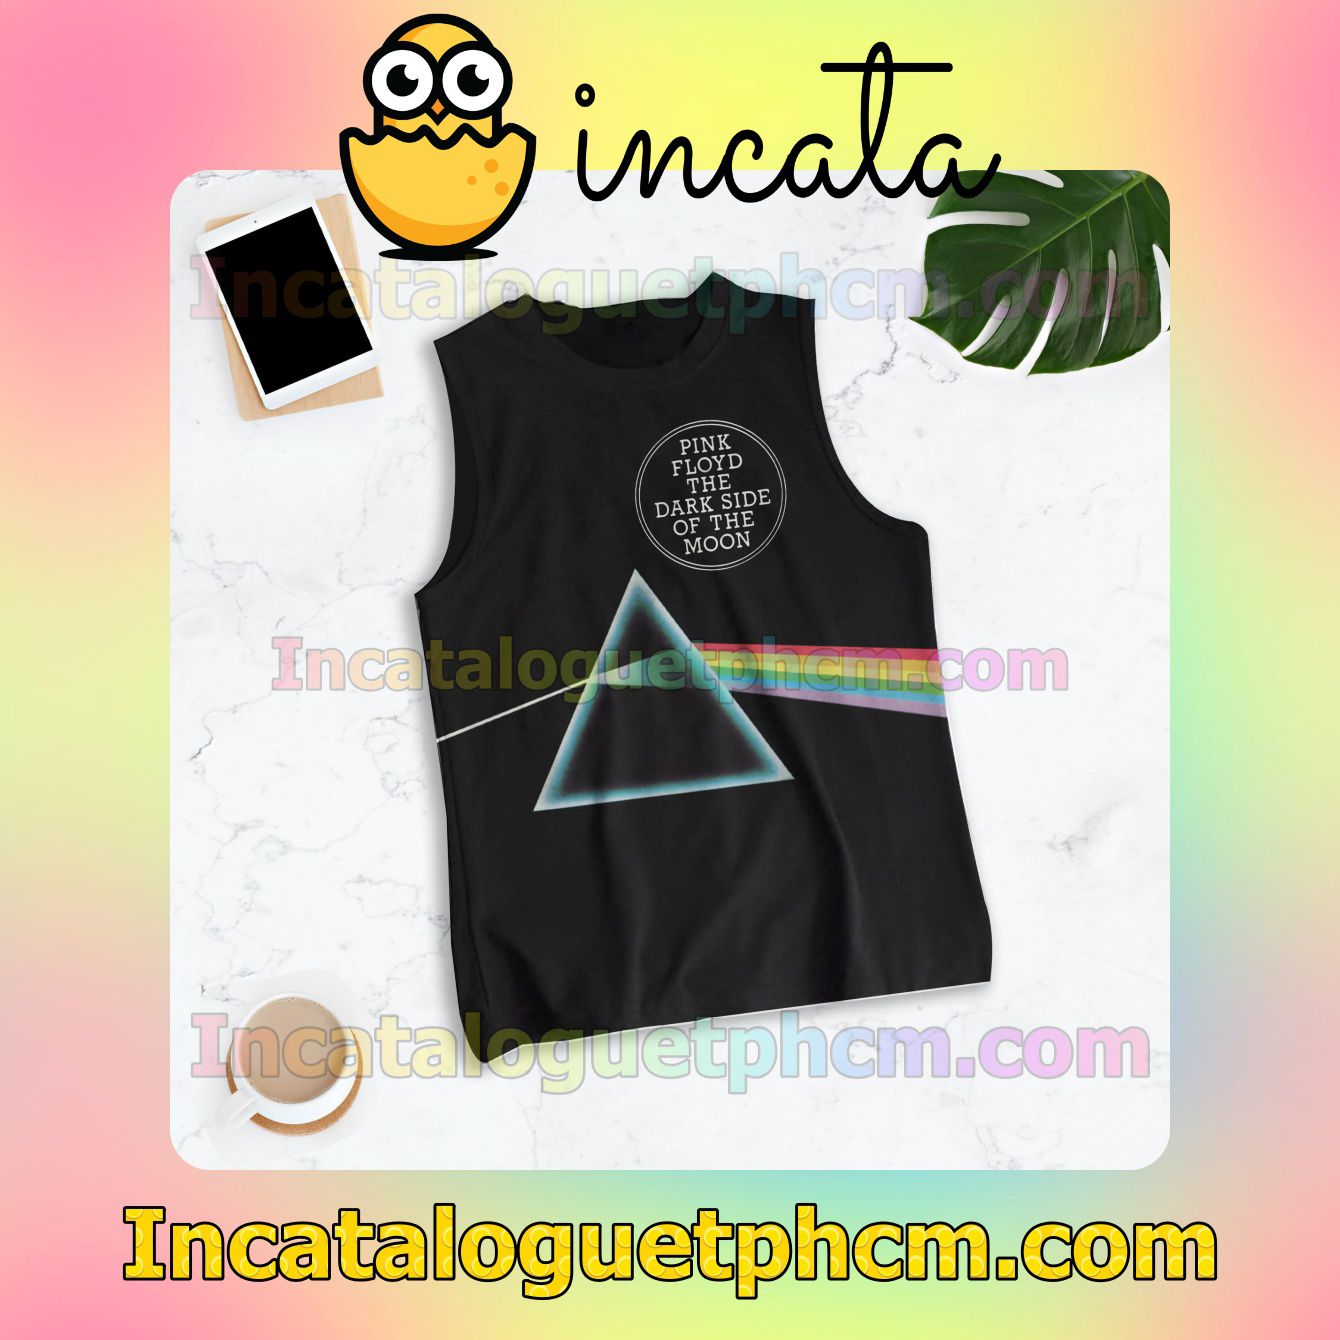 Pink Floyd The Dark Side Of The Moon Album Cover Racerback Tank